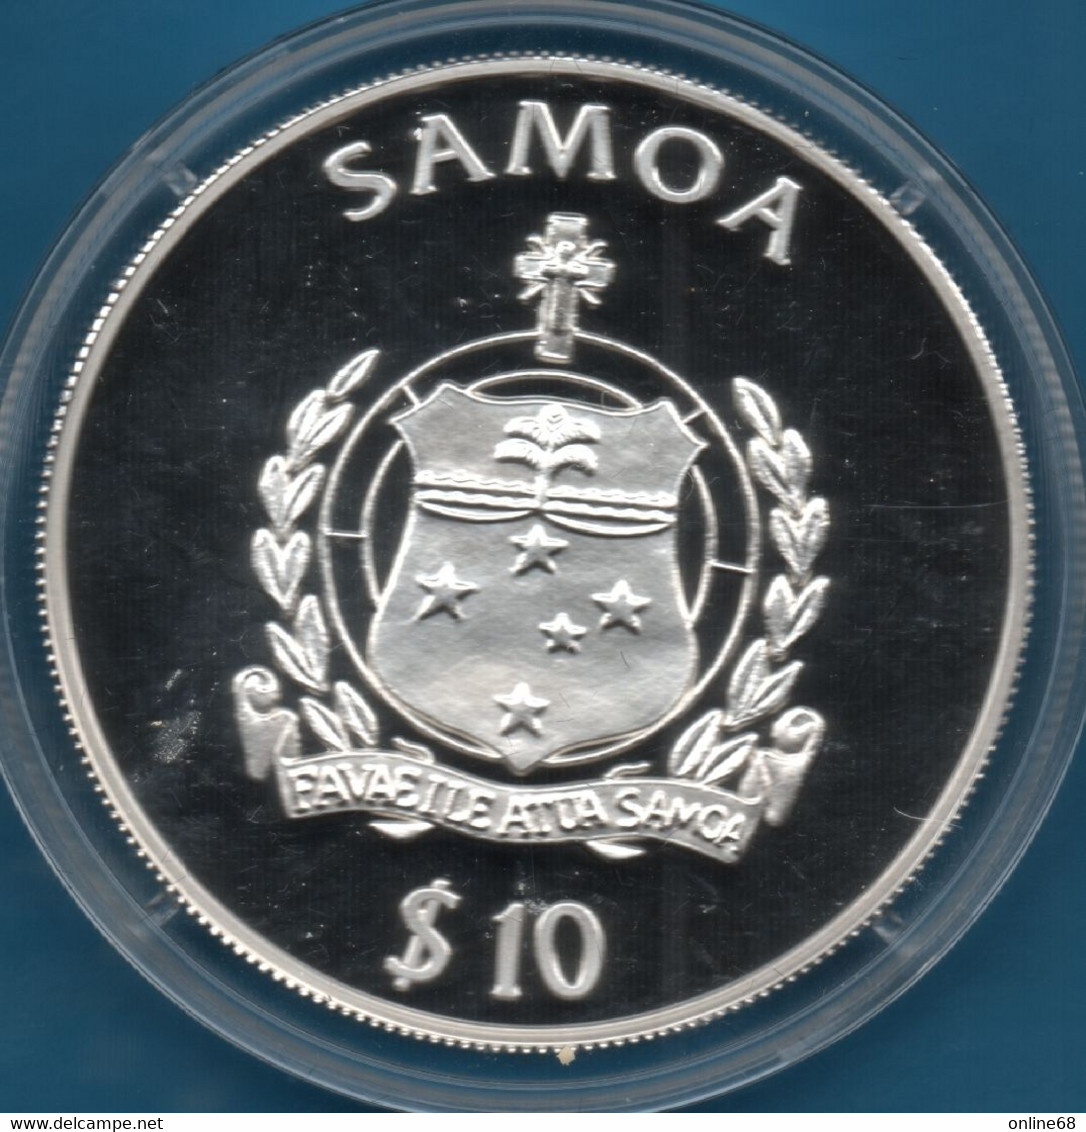 SAMOA $10 TALA 1999 Argent 925‰ Silver  PROOF SMS EBER 16 MARCH 1889 Series History Of Seafaring - Samoa